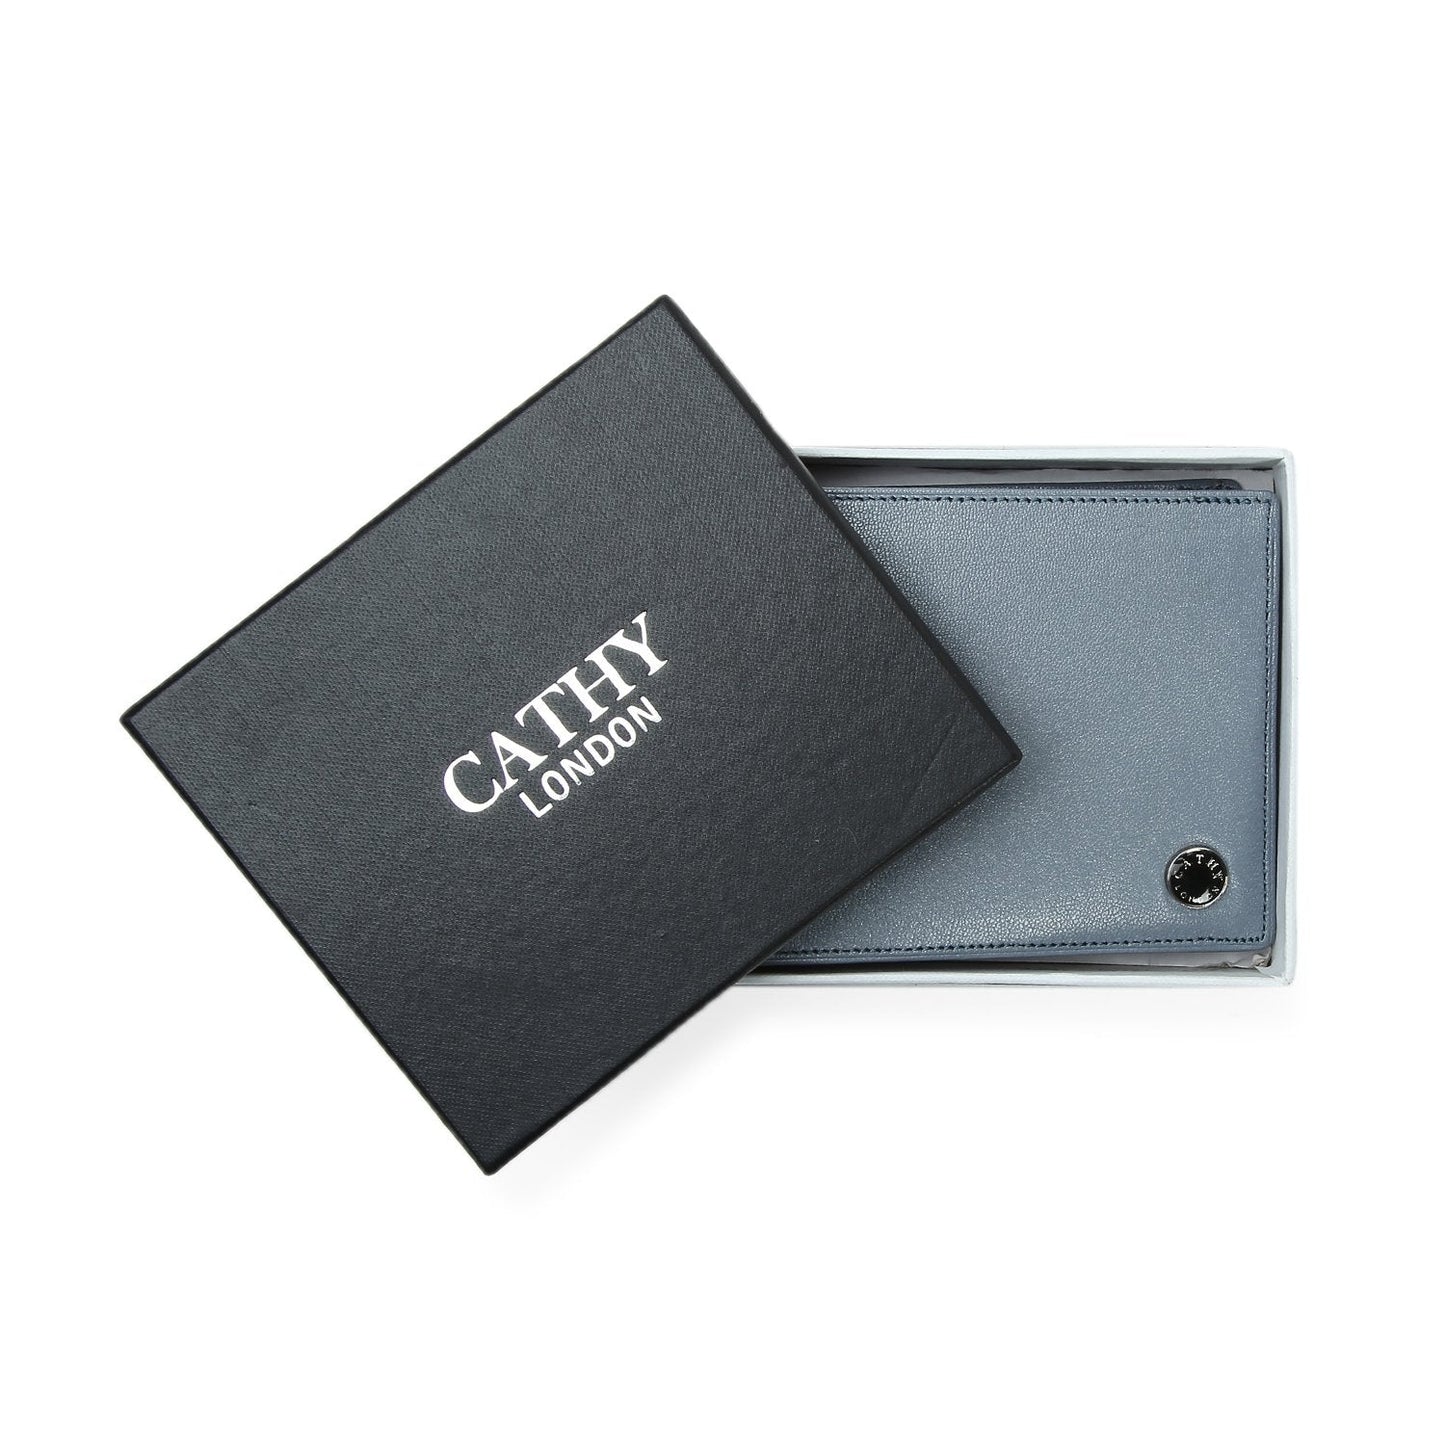 Cathy London Limited Edition RFID Men's Wallet 6 Card Slots with coin pocket